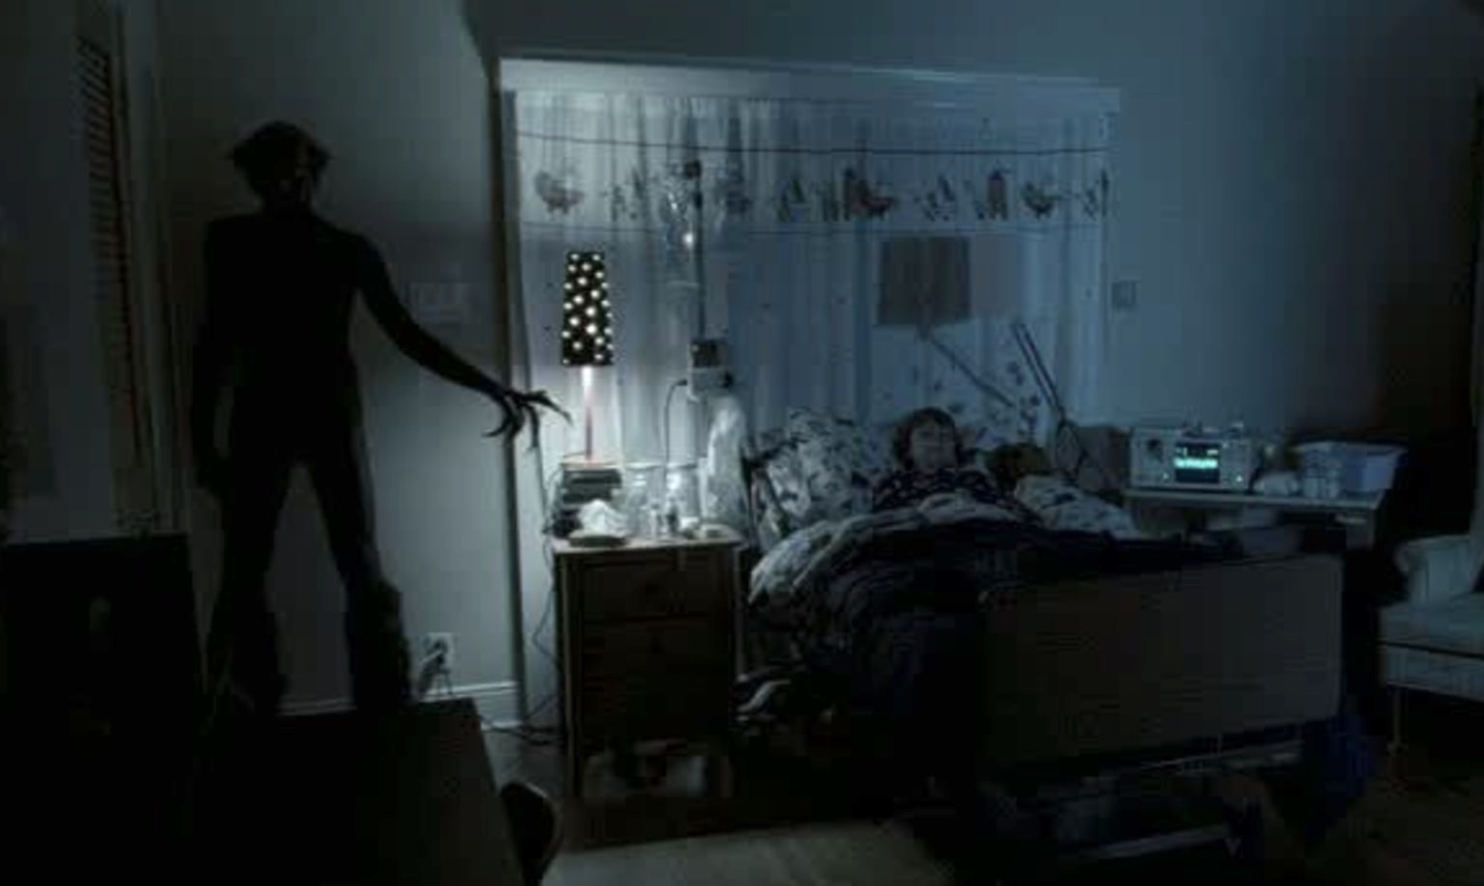 A young boy sleeps in a dark room while a creature stands in the corner